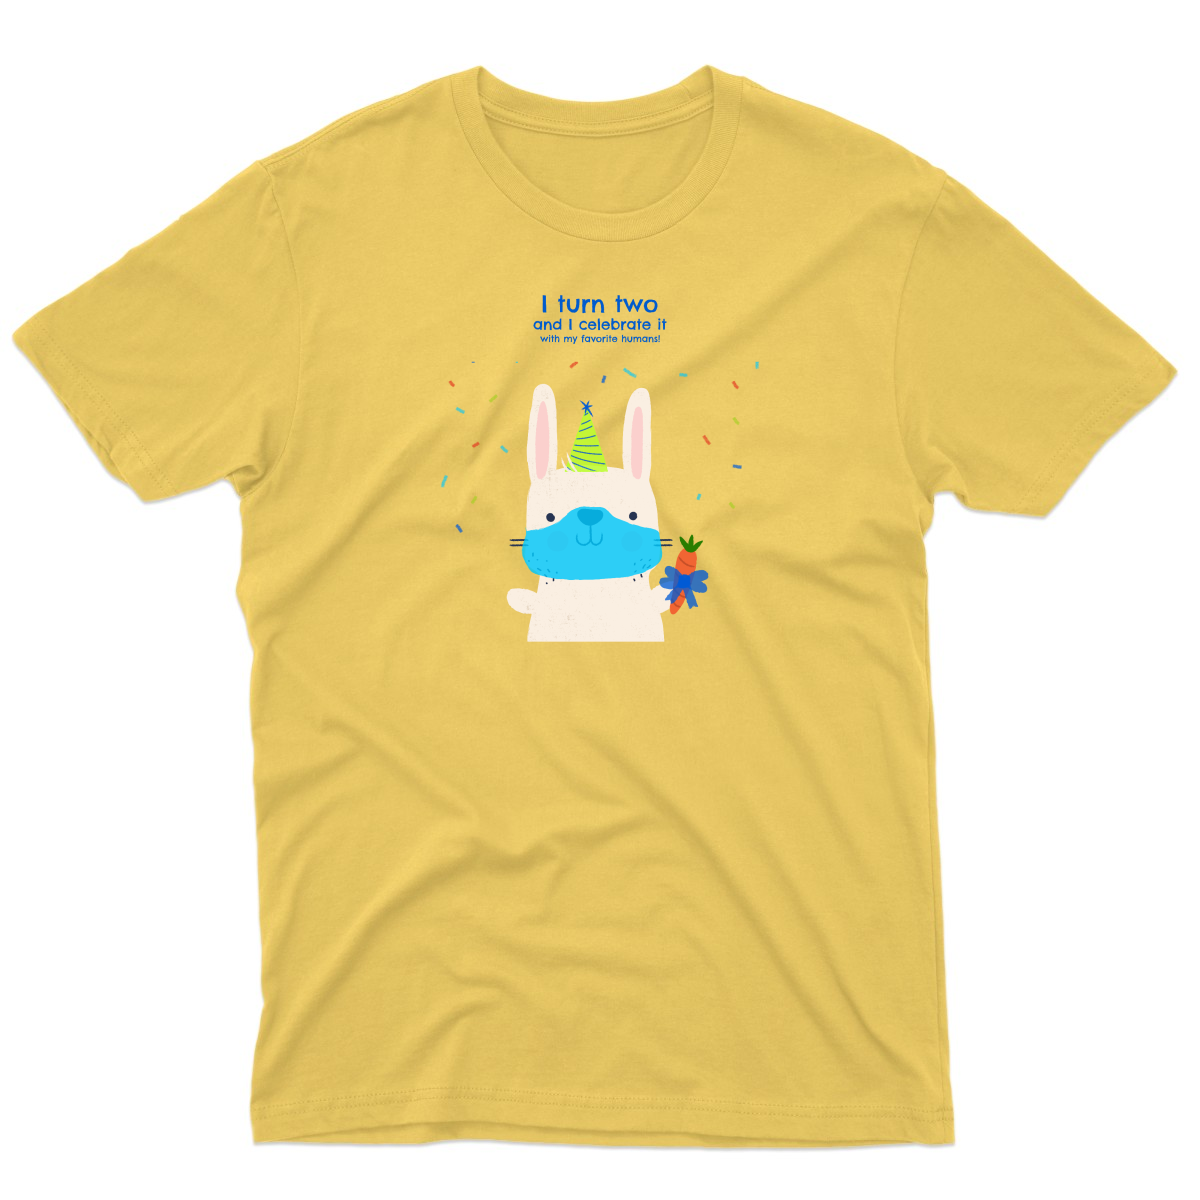 I turn two and I celebrate it with my favorite humans  Men's T-shirt | Yellow